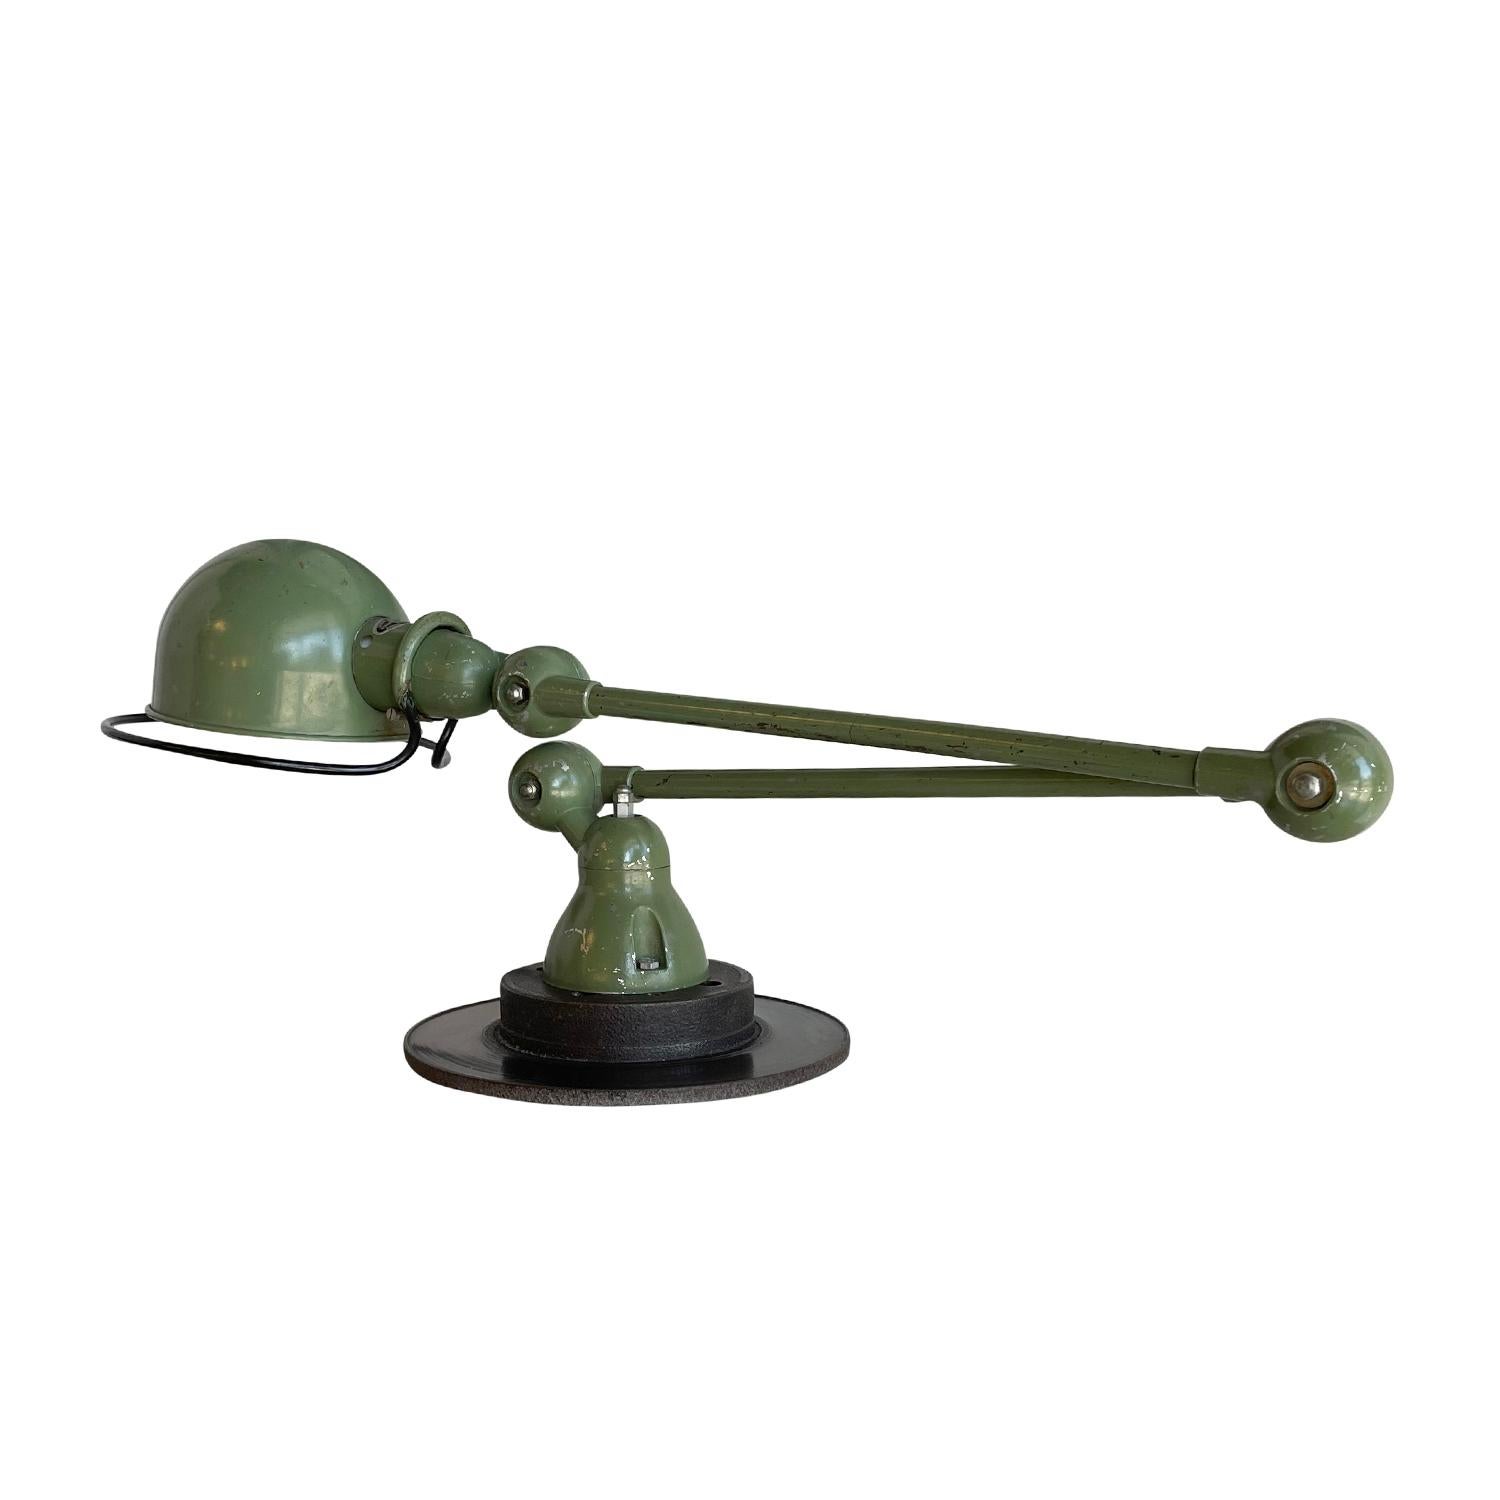 A dark-green, vintage Mid-Century Modern French desk light made of handcrafted metal, designed by Jean Louis Domecq and produced by Jielde, in good condition. The industrial car brake, table lamp is composed with two adjustable arms, featuring a one